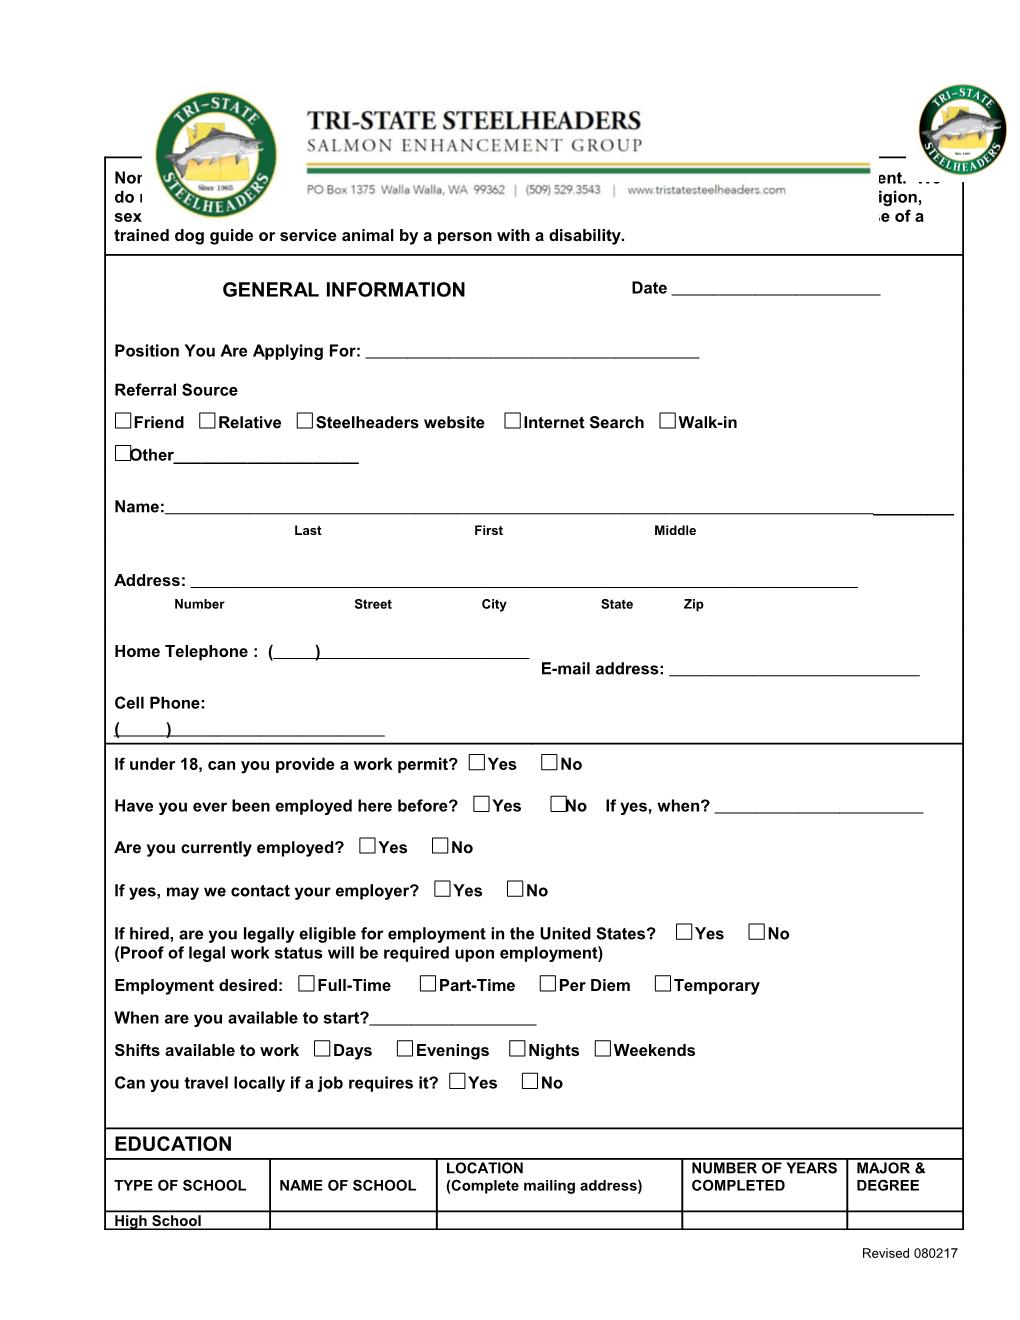 Sample Employment Application Form s2